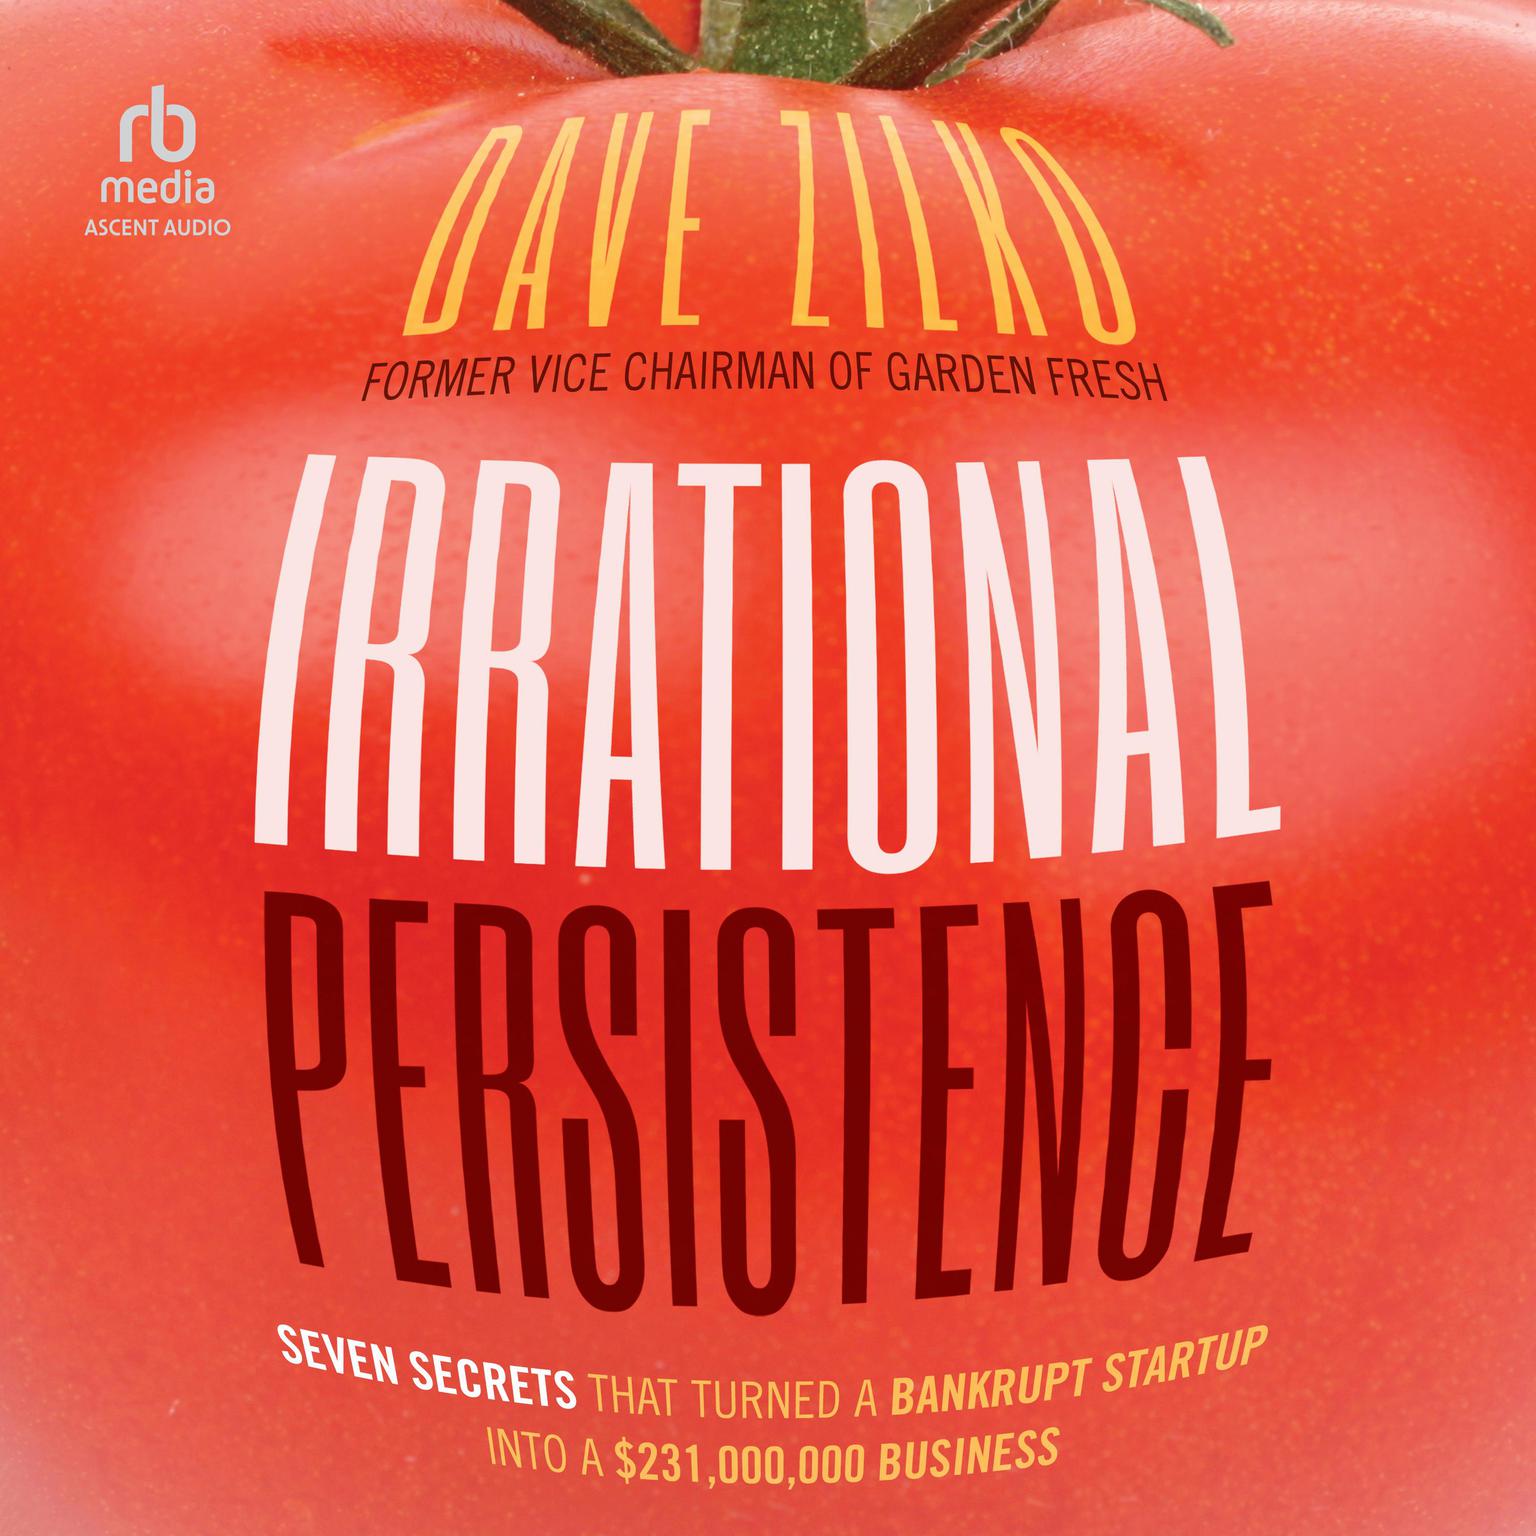 Irrational Persistence: Seven Secrets That Turned a Bankrupt Startup Into a $231,000,000 Business Audiobook, by Dave Zilko